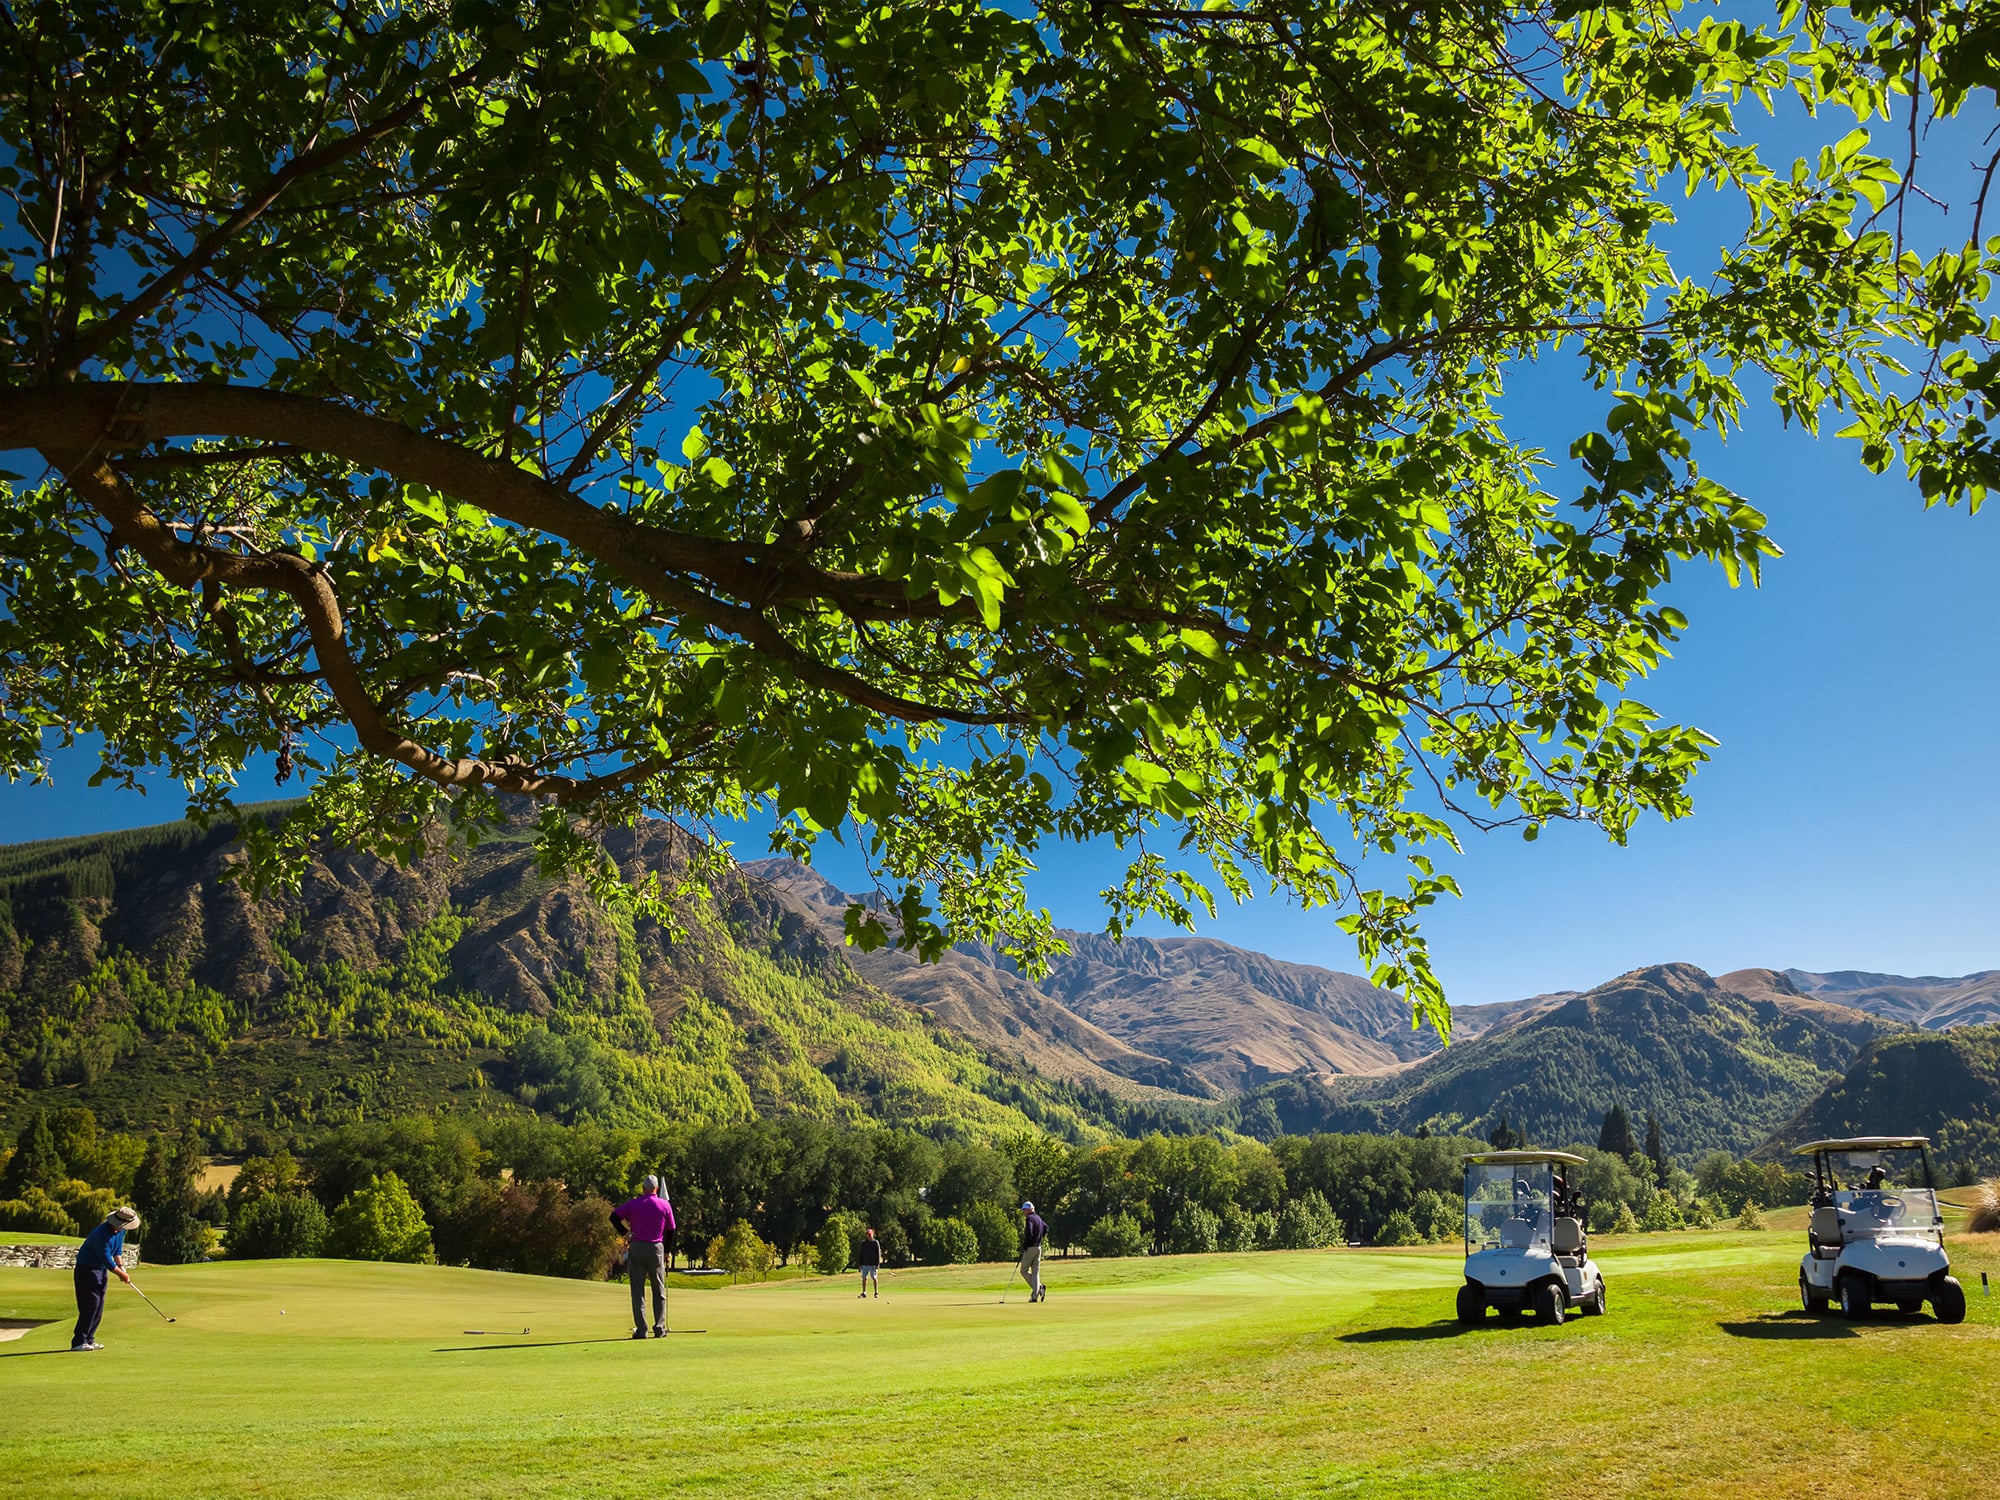 Image viewing golfers on a green at Millbrook Resort New Zealand